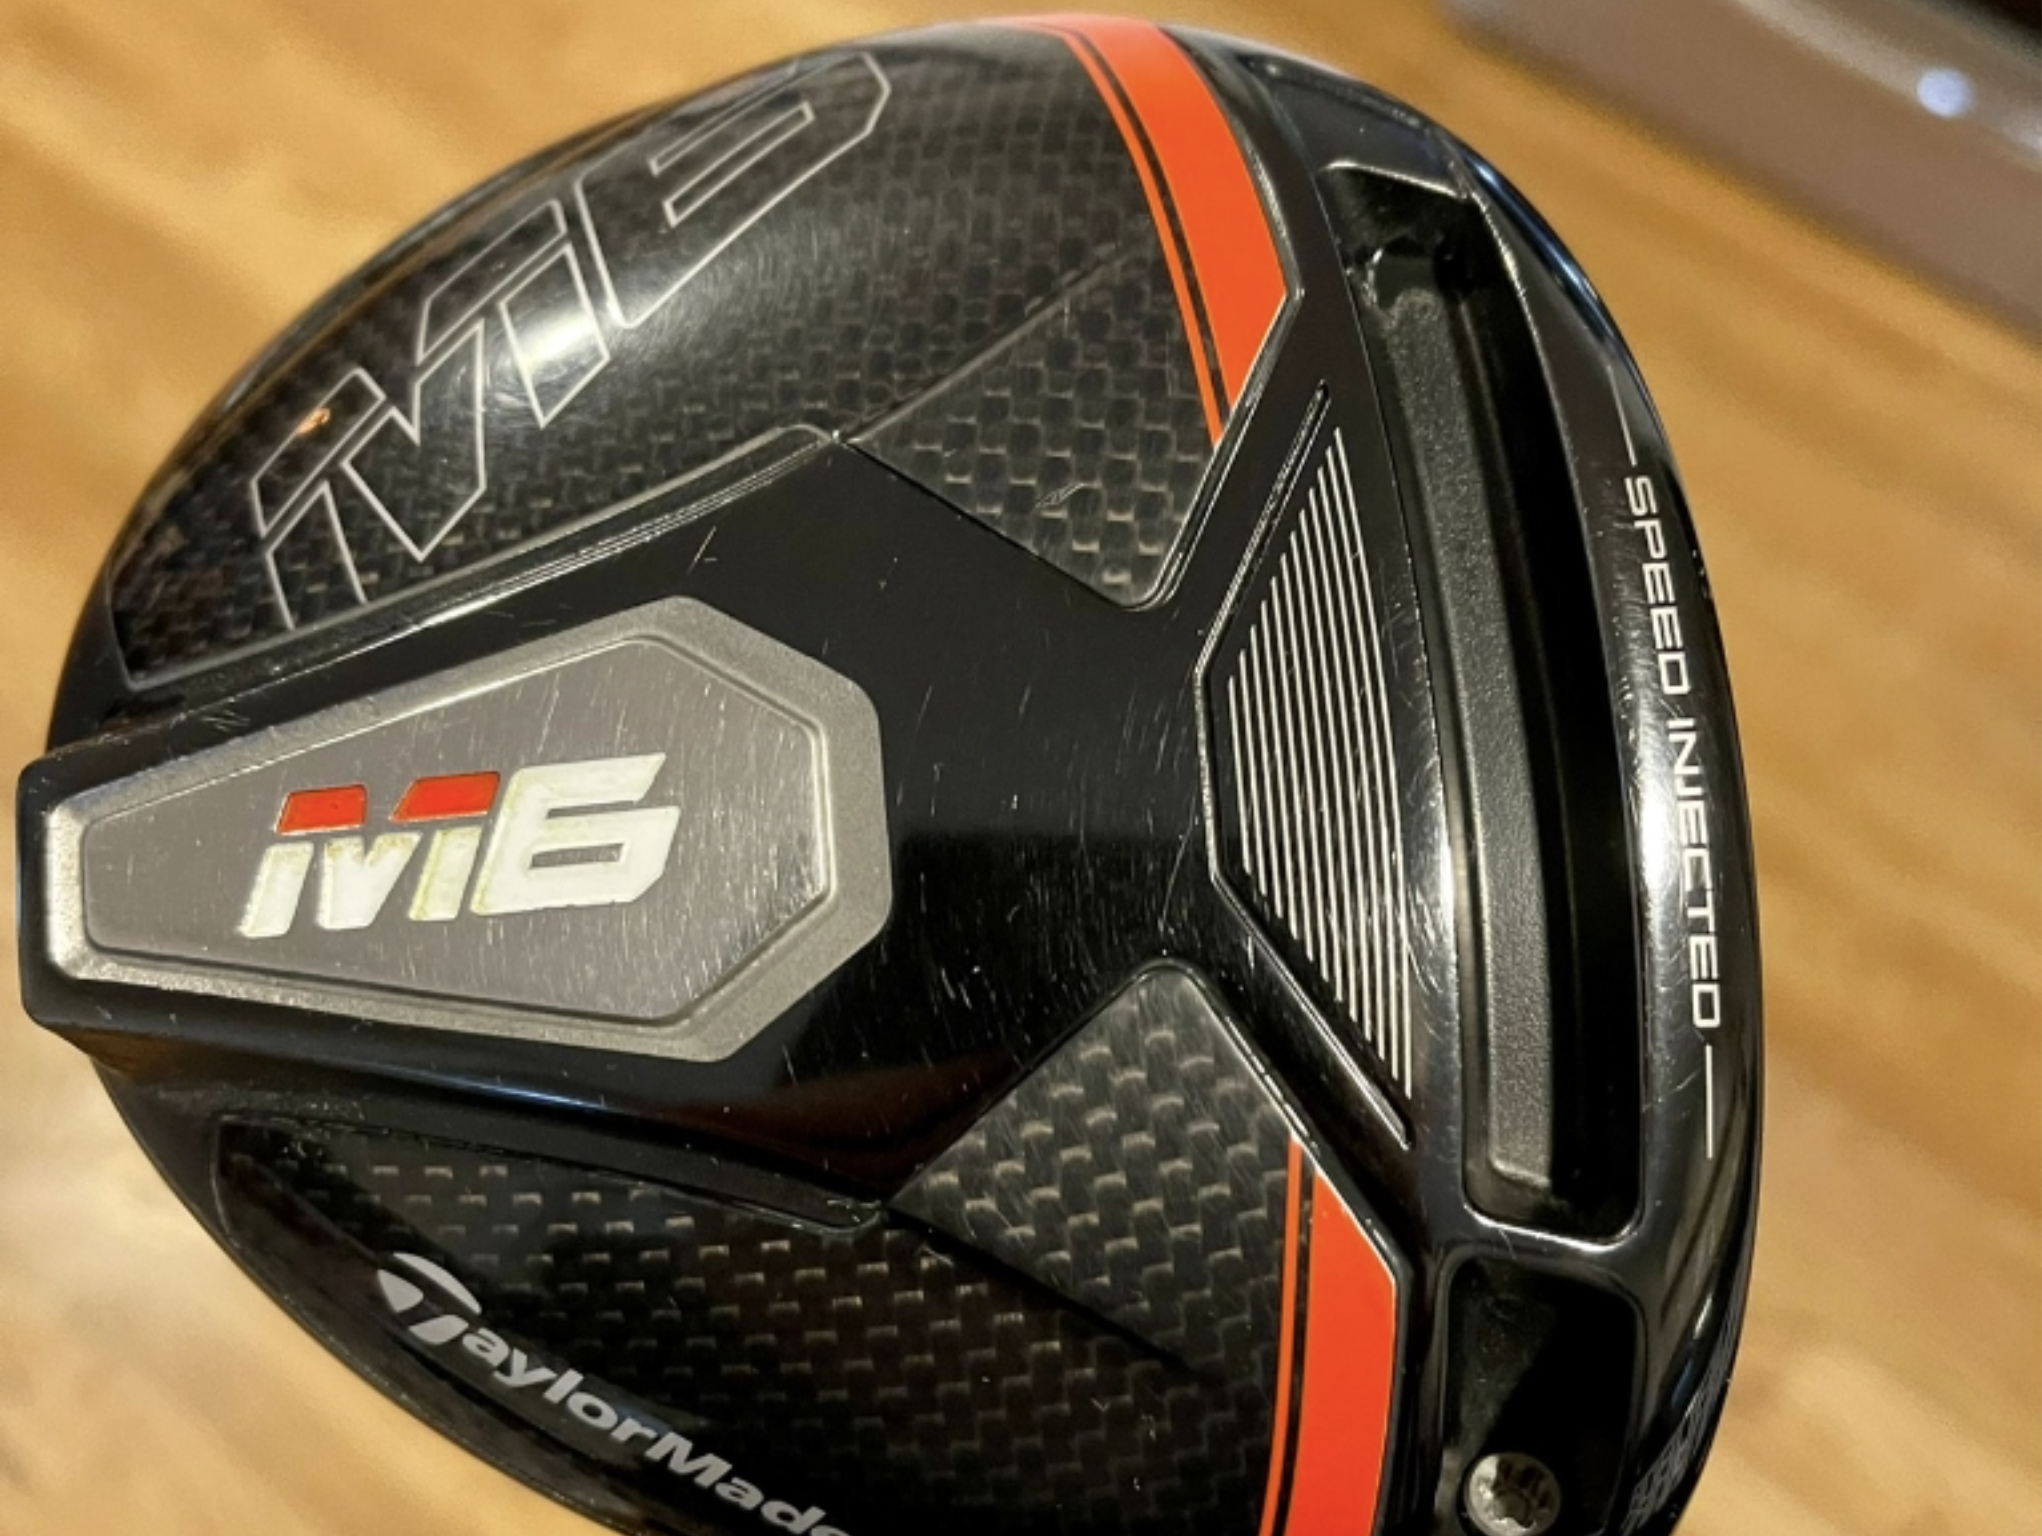 Coolest thing for sale in the GolfWRX Classifieds (1/19/22): TaylorMade M6  driver – GolfWRX